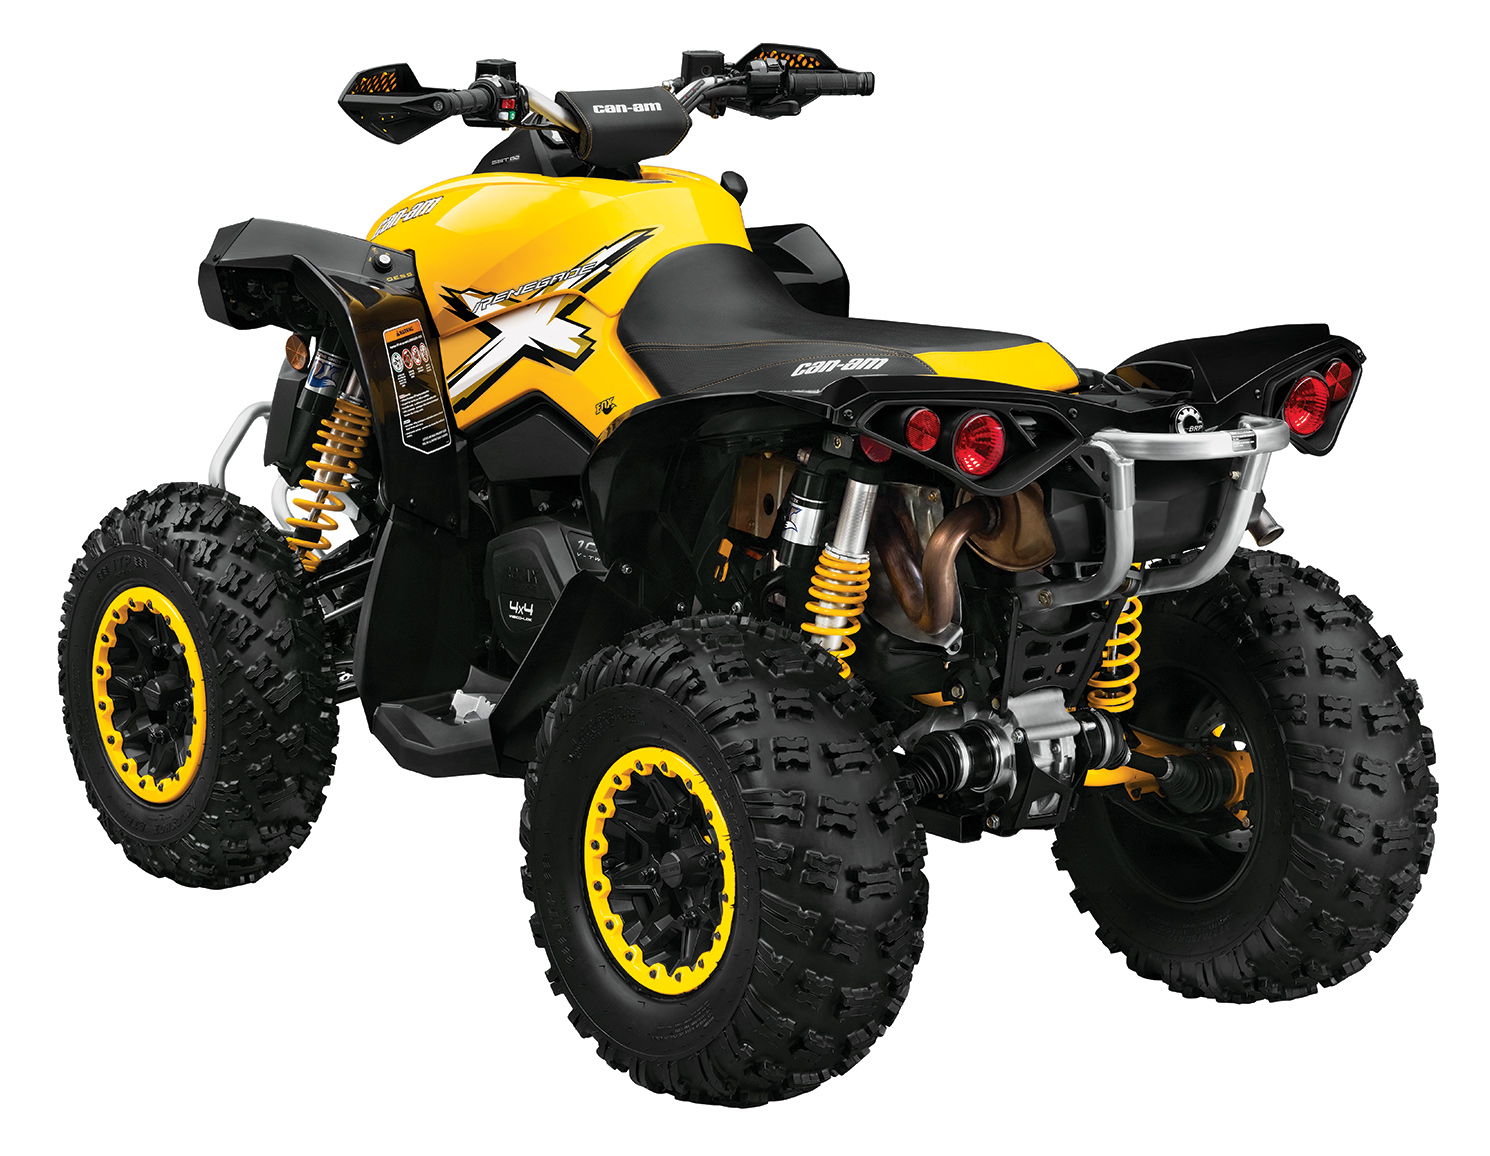  CAN-AM RENEGADE 1000 XXC v 2014  2 